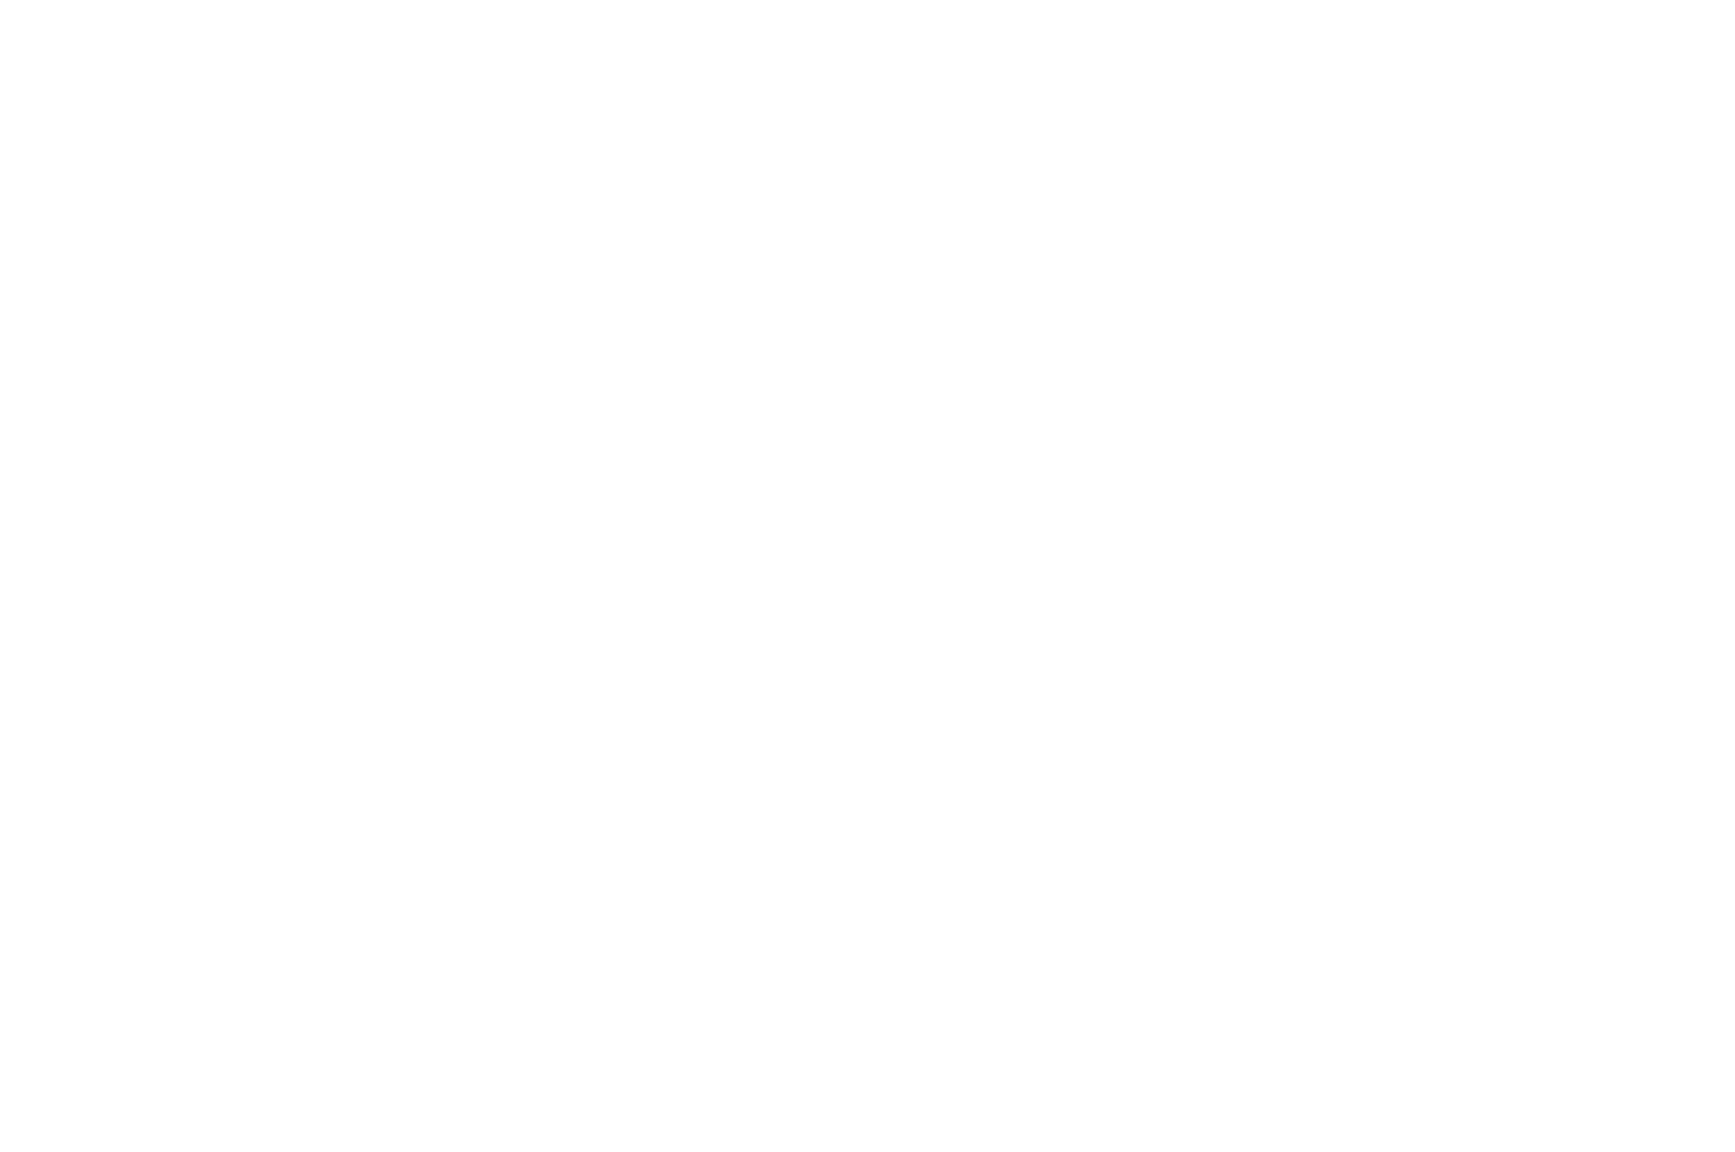 Official Selection Chattanooga Film Festival 2022